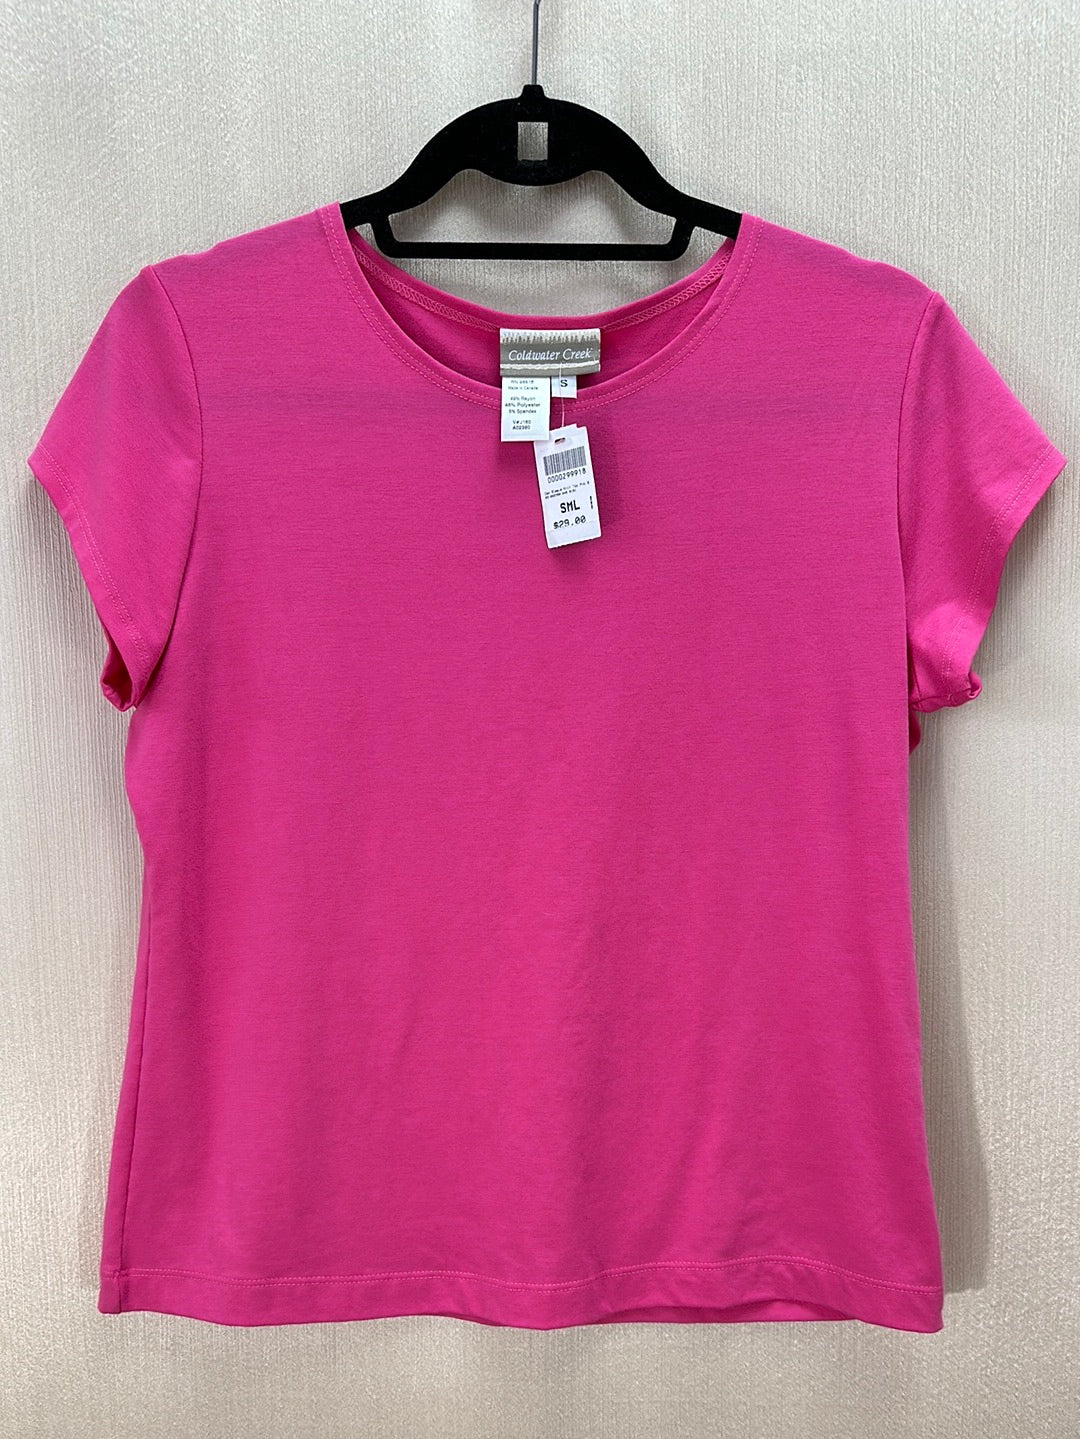 NWT - COLDWATER CREEK pink Rayon Blend Short Sleeve T-Shirt - S